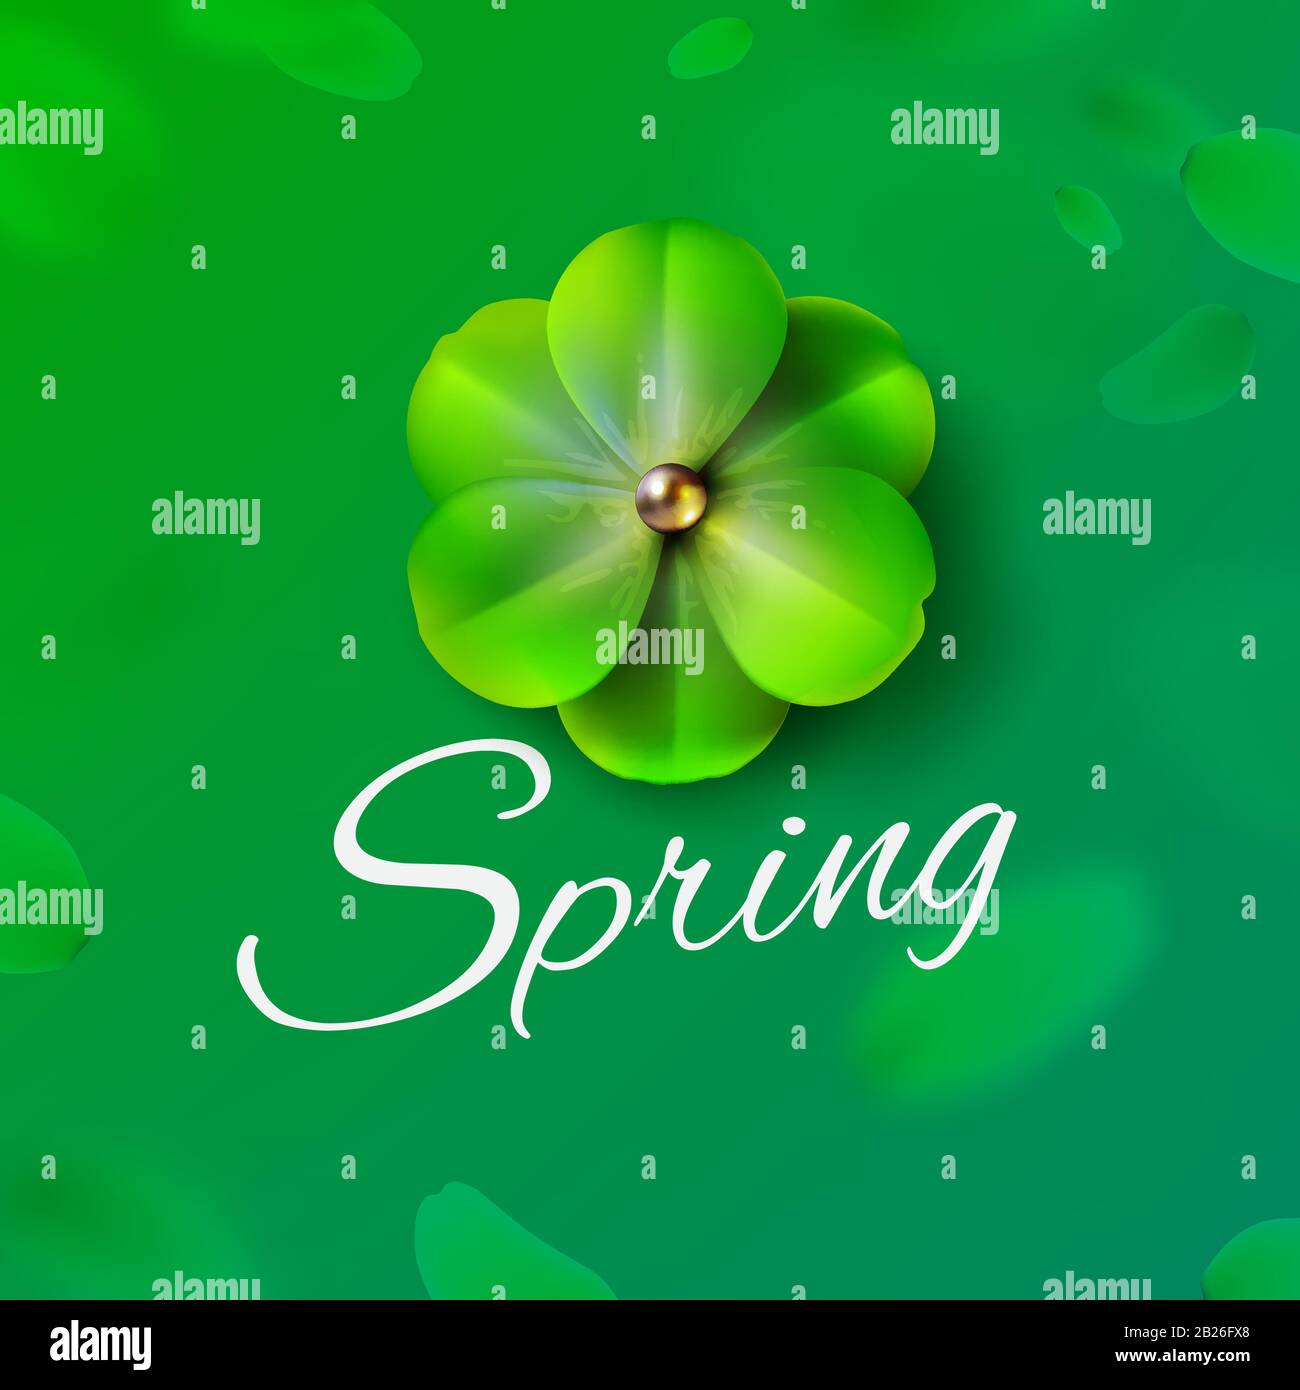 Hello, hi spring green background stock vector illustration. Realistic flower. Templates for placards, banners, flyers, presentations, reports Stock Vector